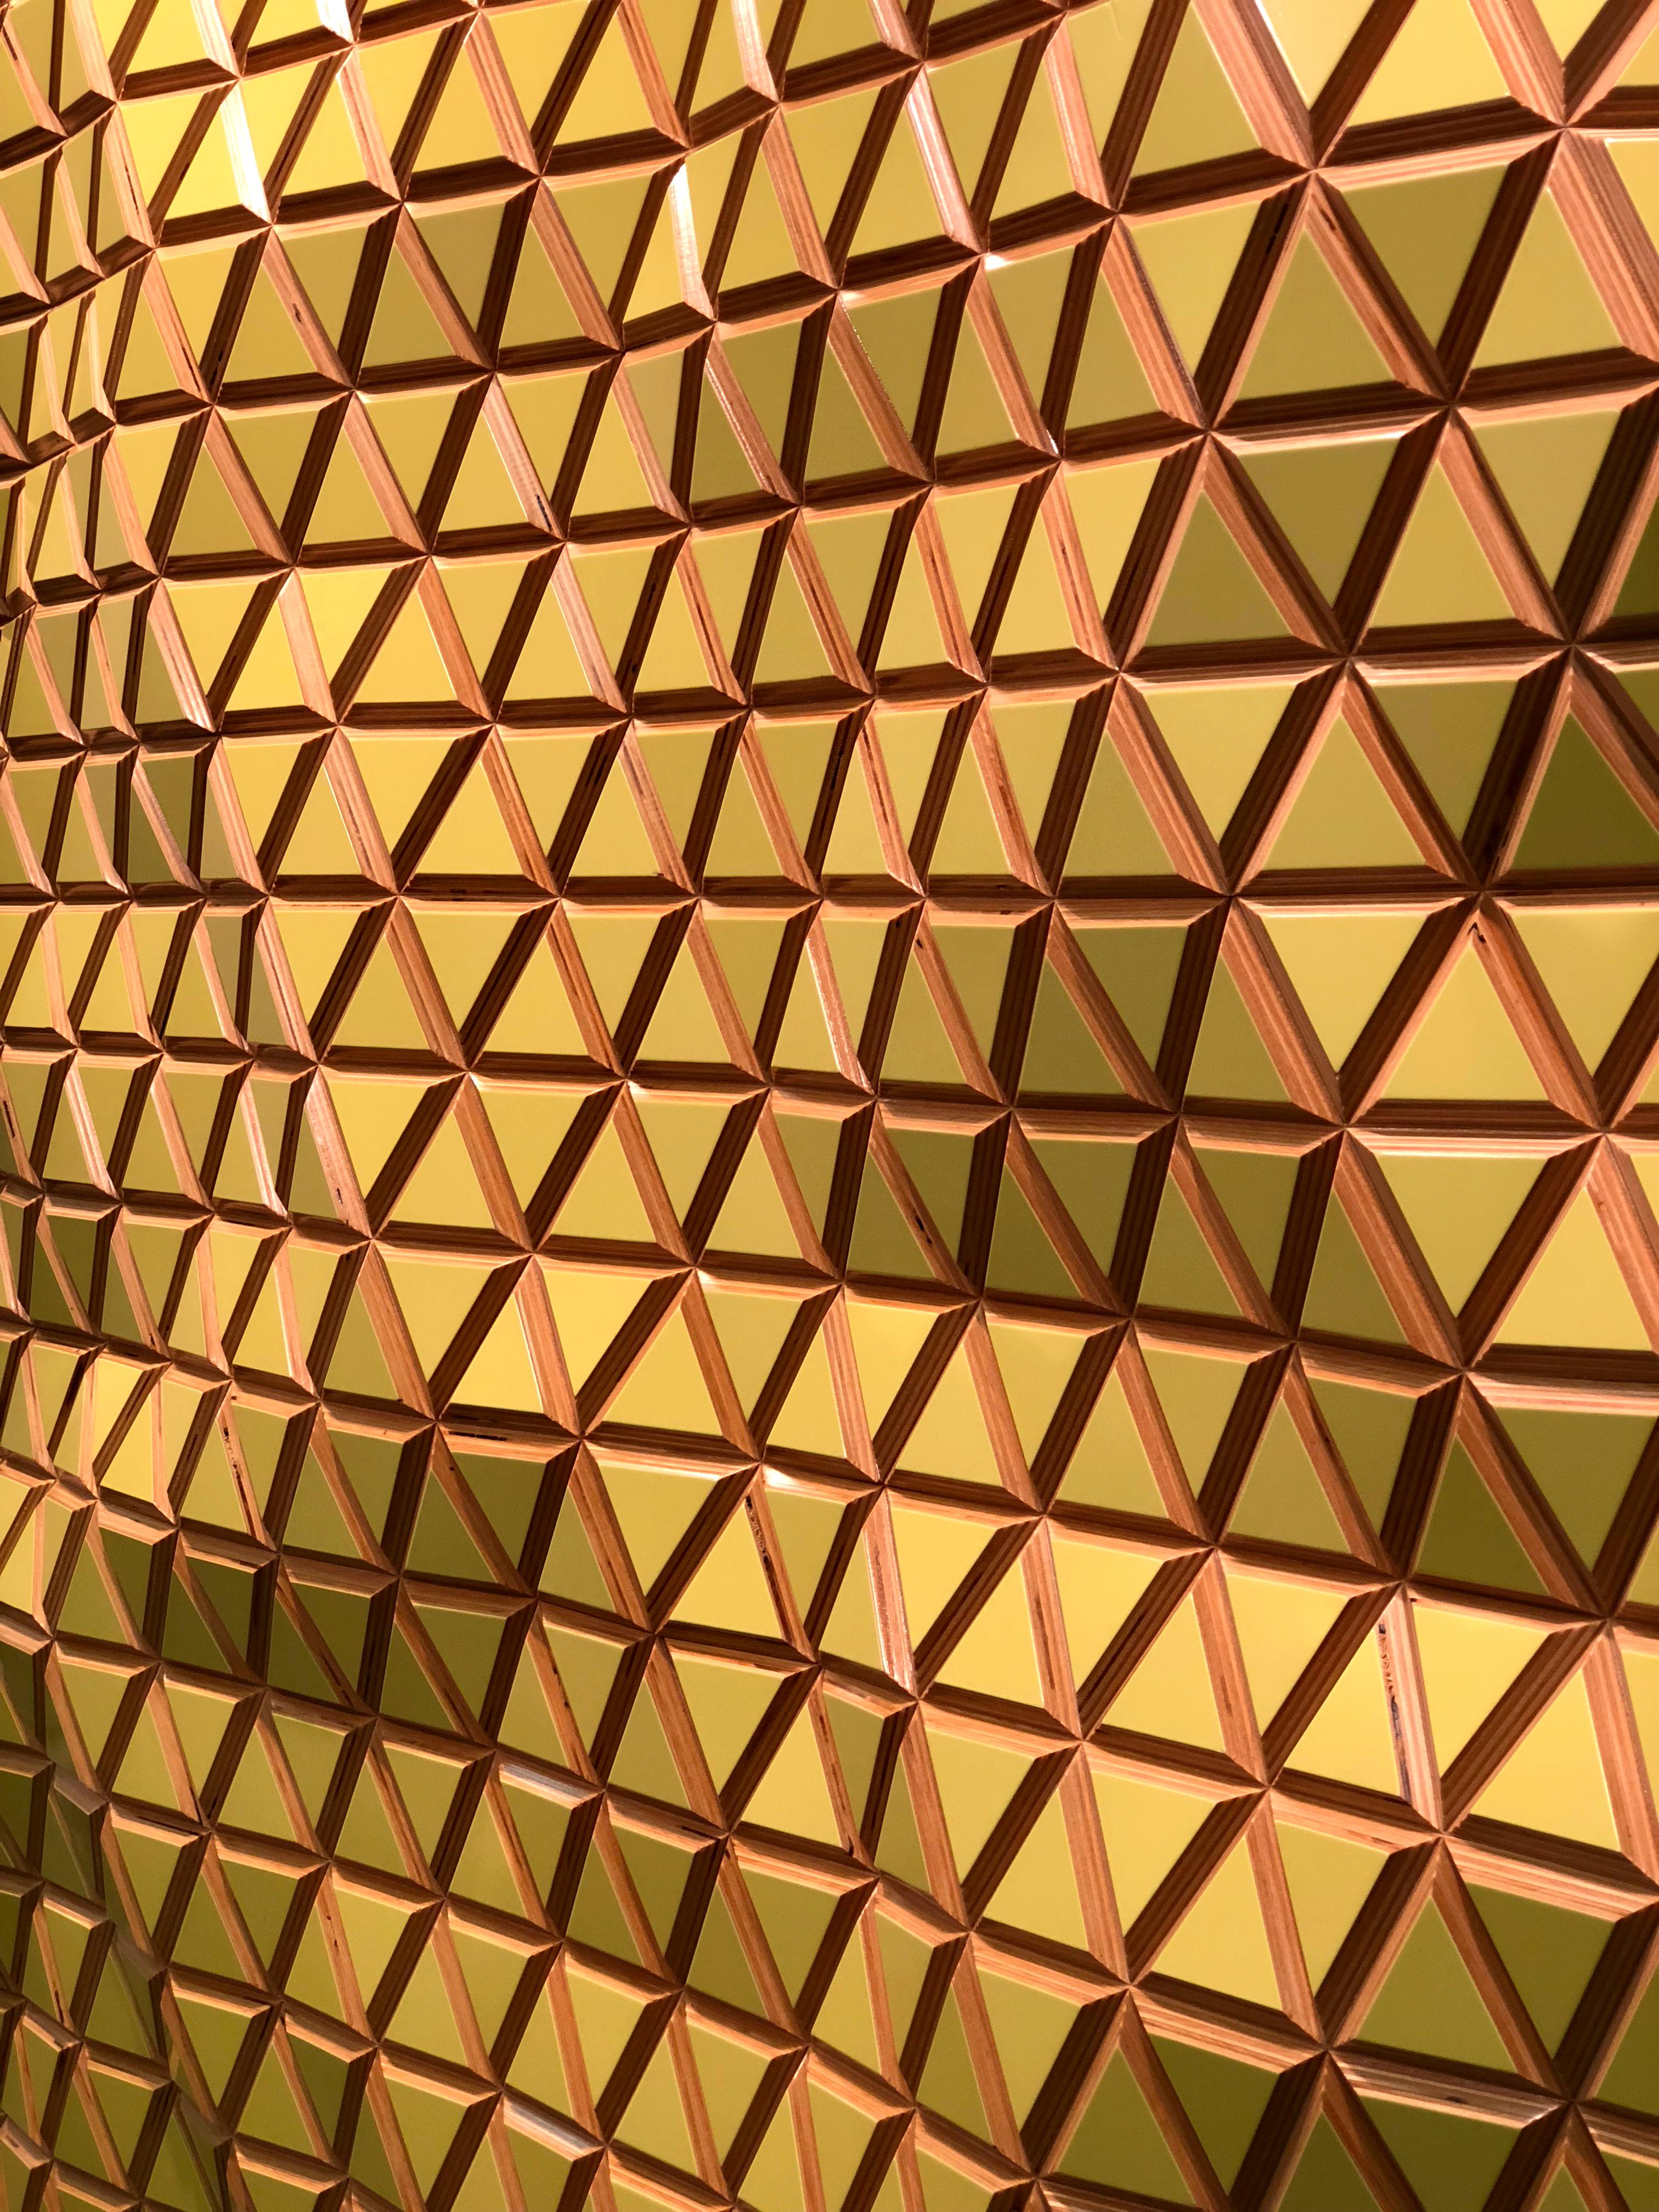 Honeycomb Conjecture, painted carved wood sculptural wall, parametric design 1